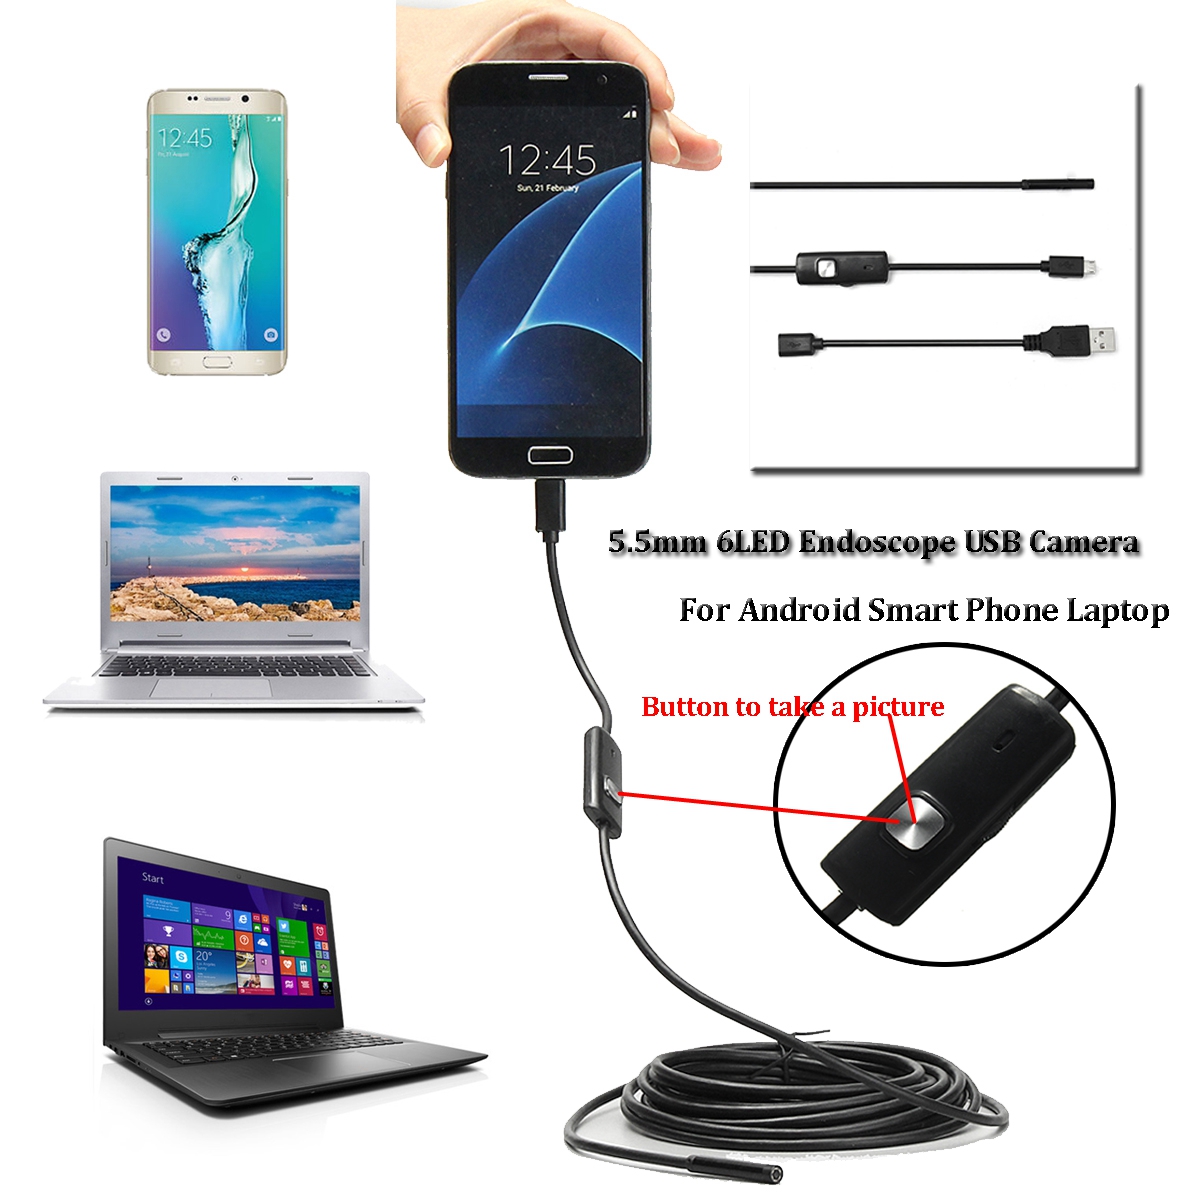 Android smartphone usb endoscope